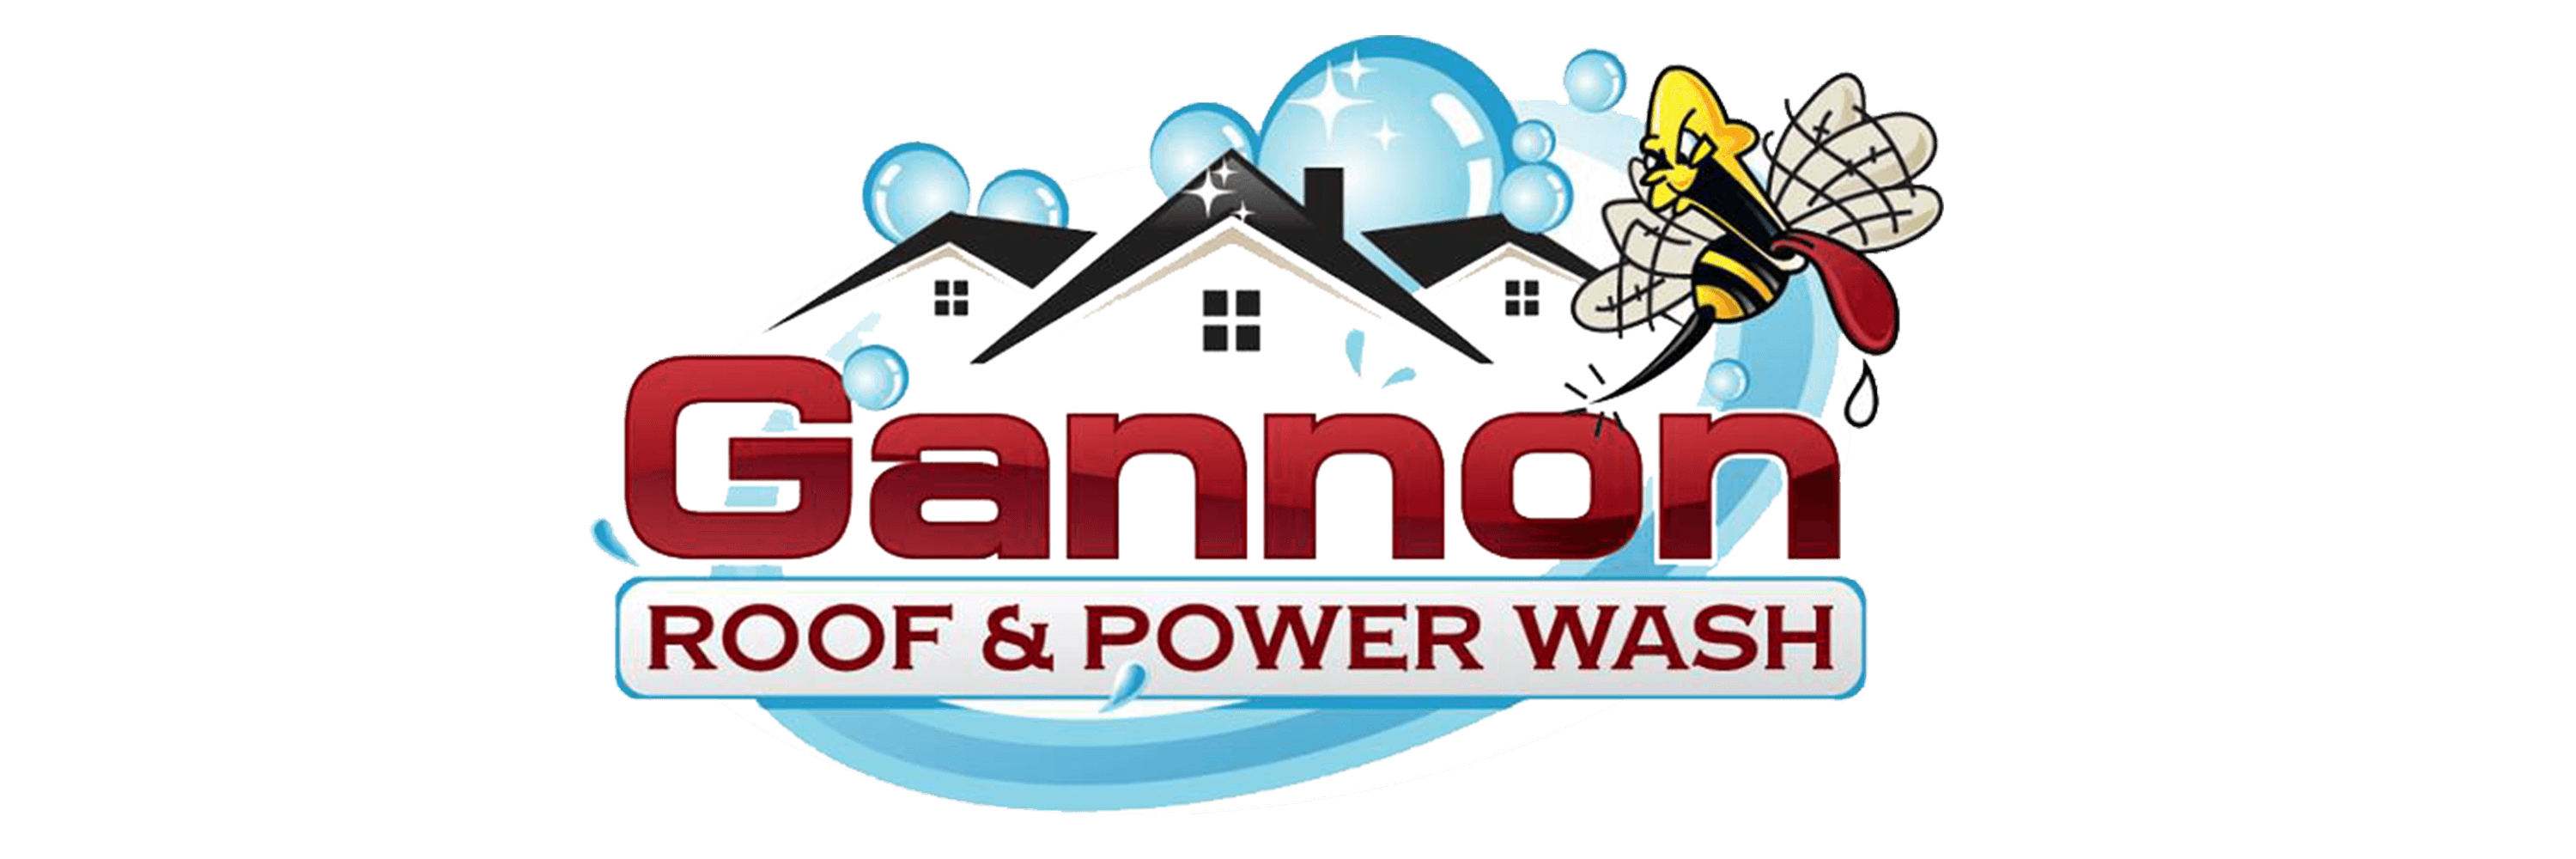 Roof Shampoo Logo - Shampoo Your Roof – Shampoo Your Roof